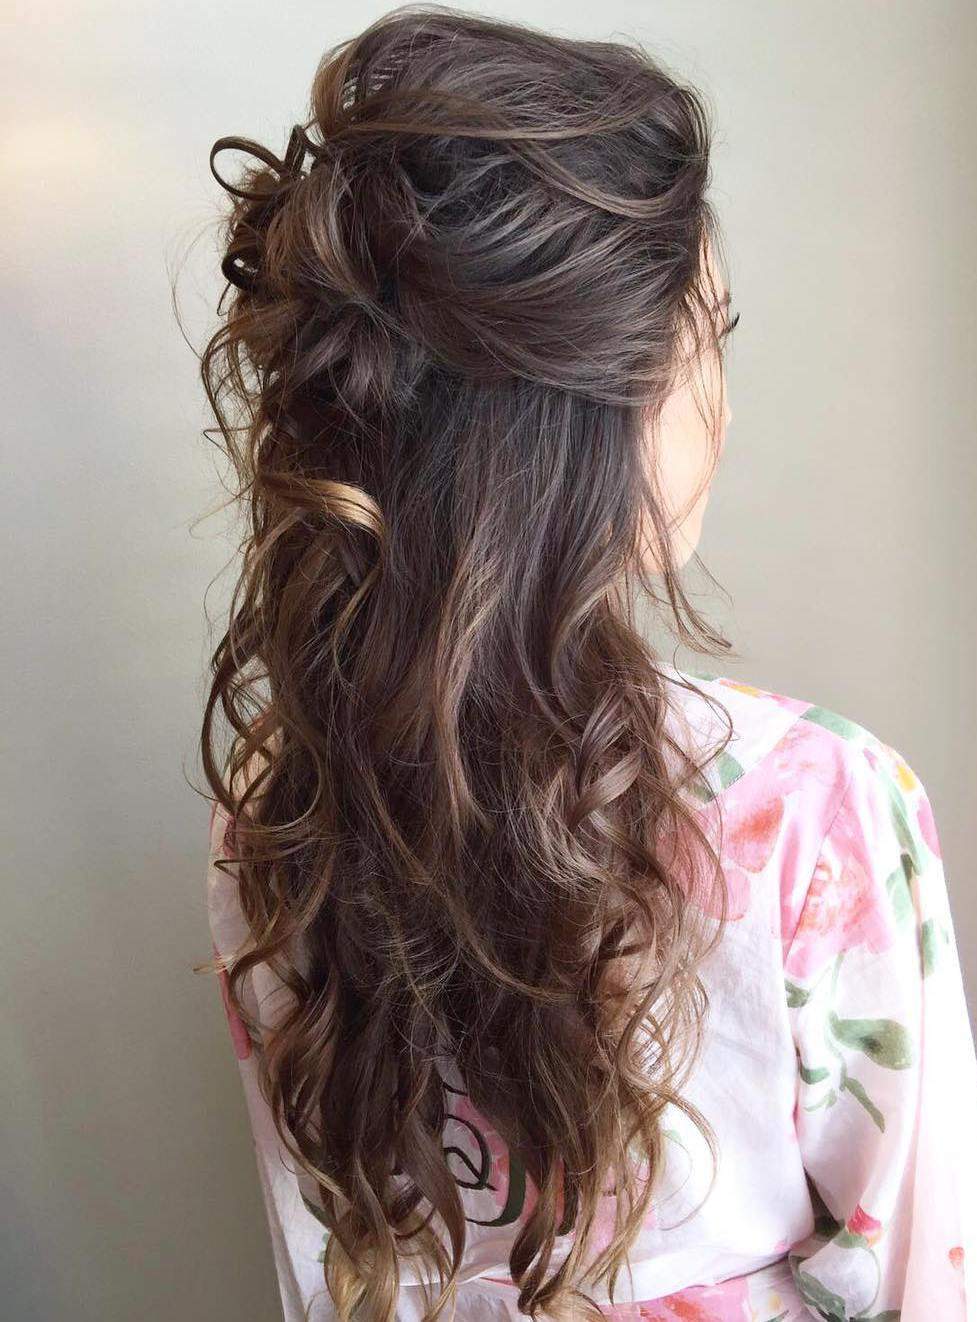 Half Updo Curly Hairstyles
 40 Irresistible Hairstyles for Brides and Bridesmaids